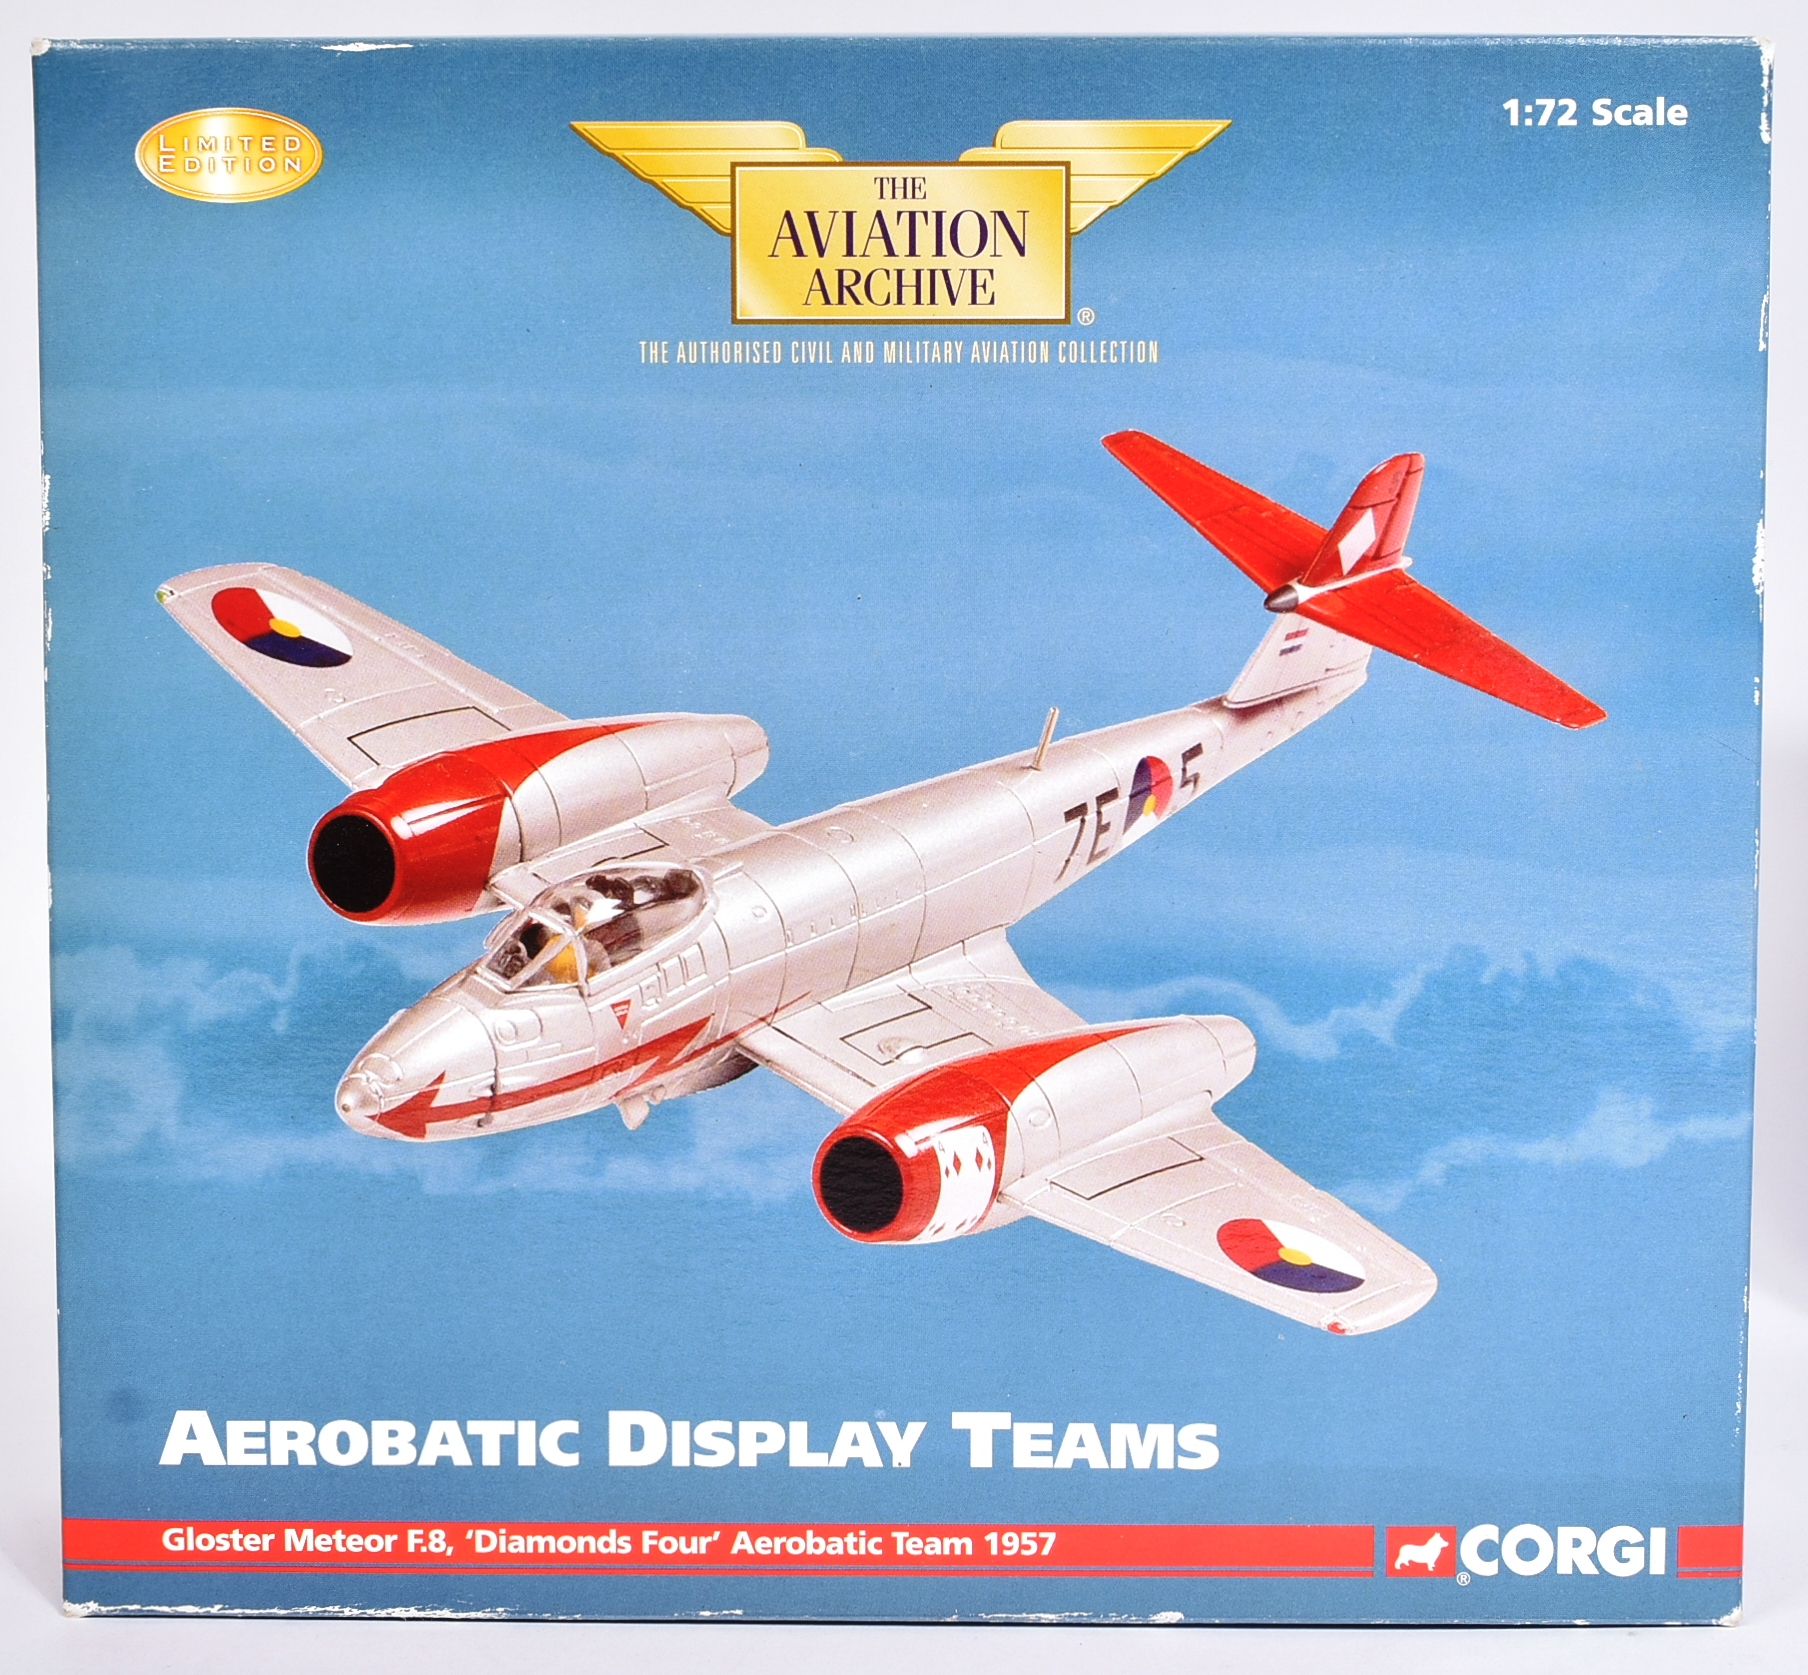 DIECAST - X2 AVIATION ARCHIVE 1/72 SCALE AEROBATIC DISPLAY TEAMS - Image 2 of 5